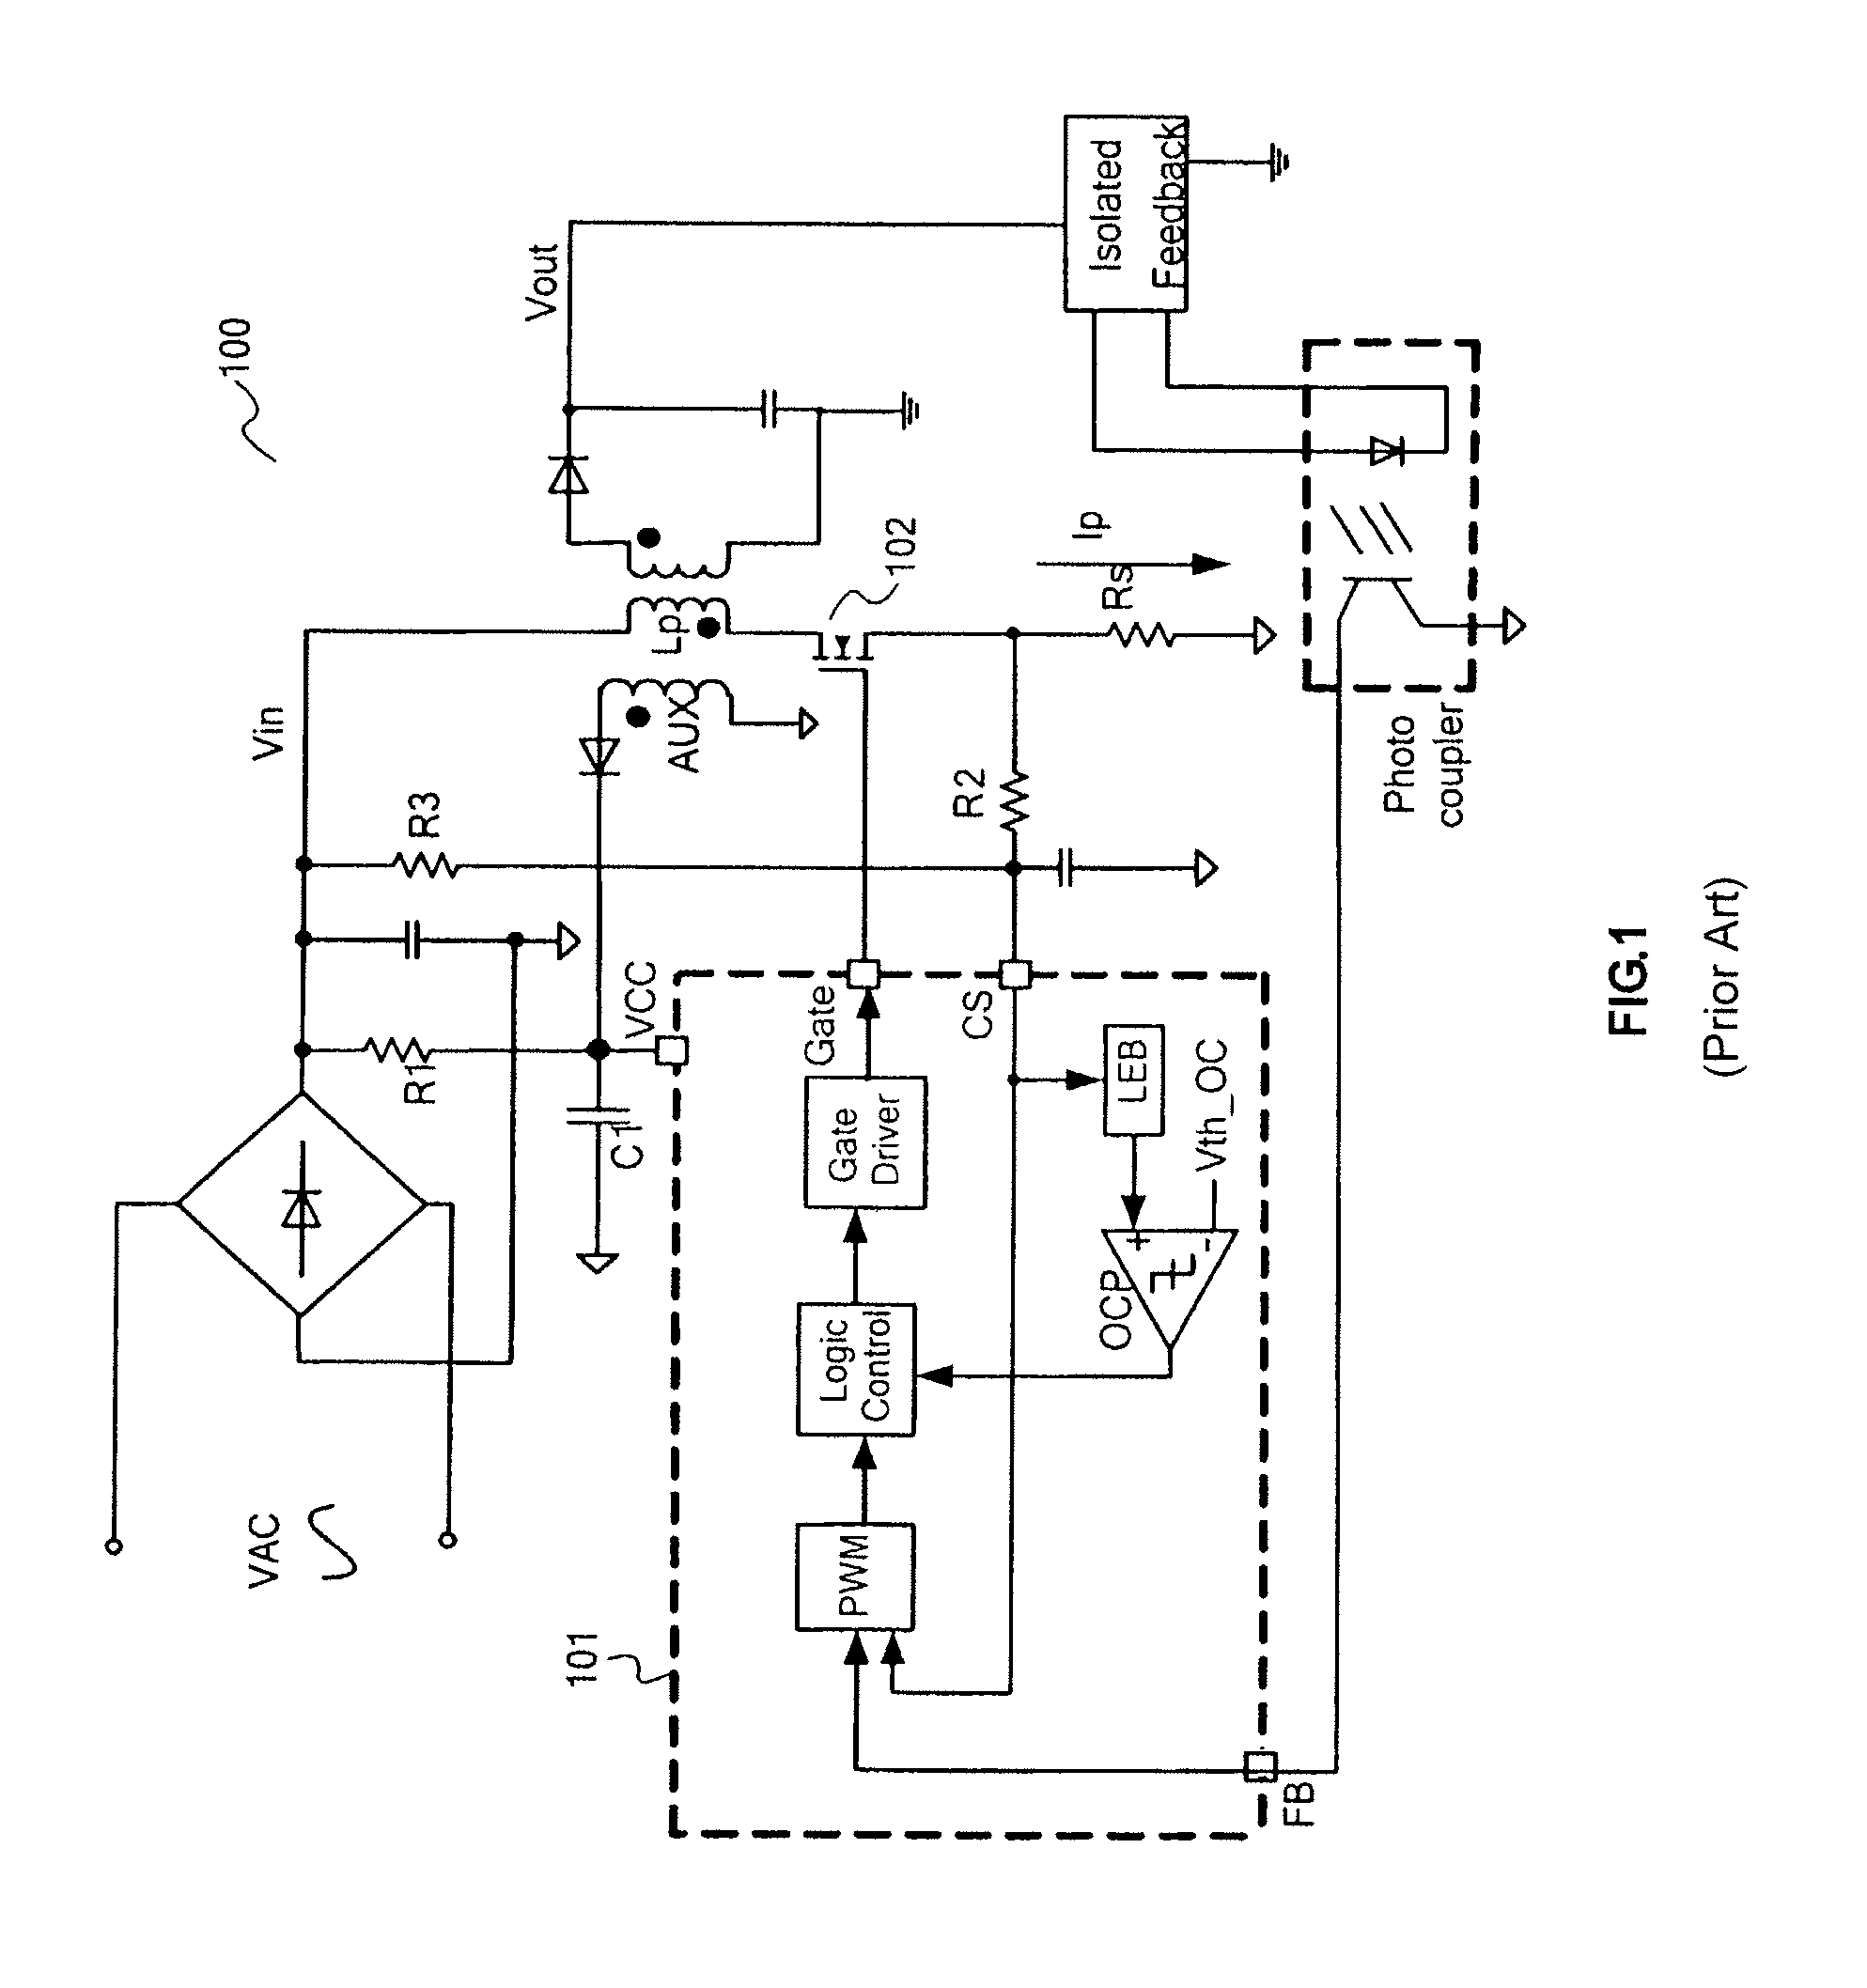 Method and system for efficient power control with multiple modes